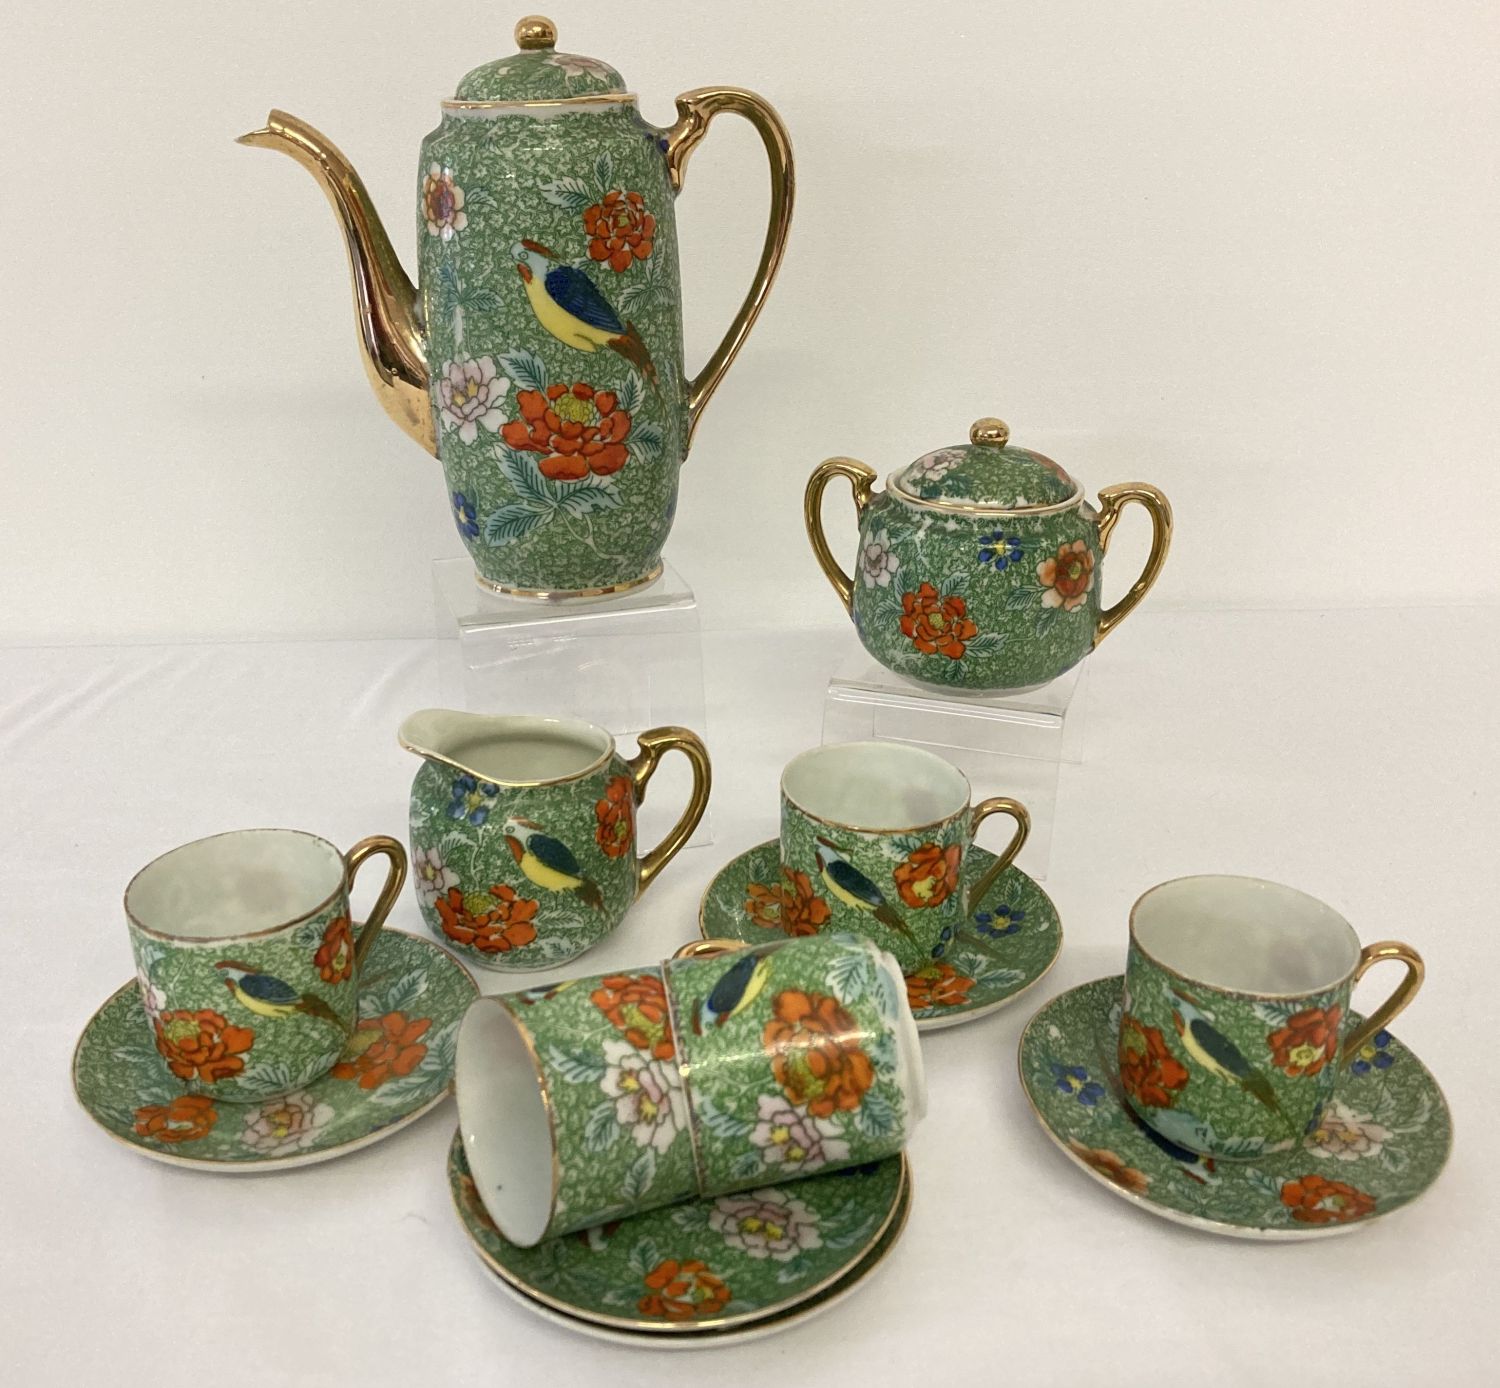 A vintage Japanese 13 piece coffee set with floral and bird detail.